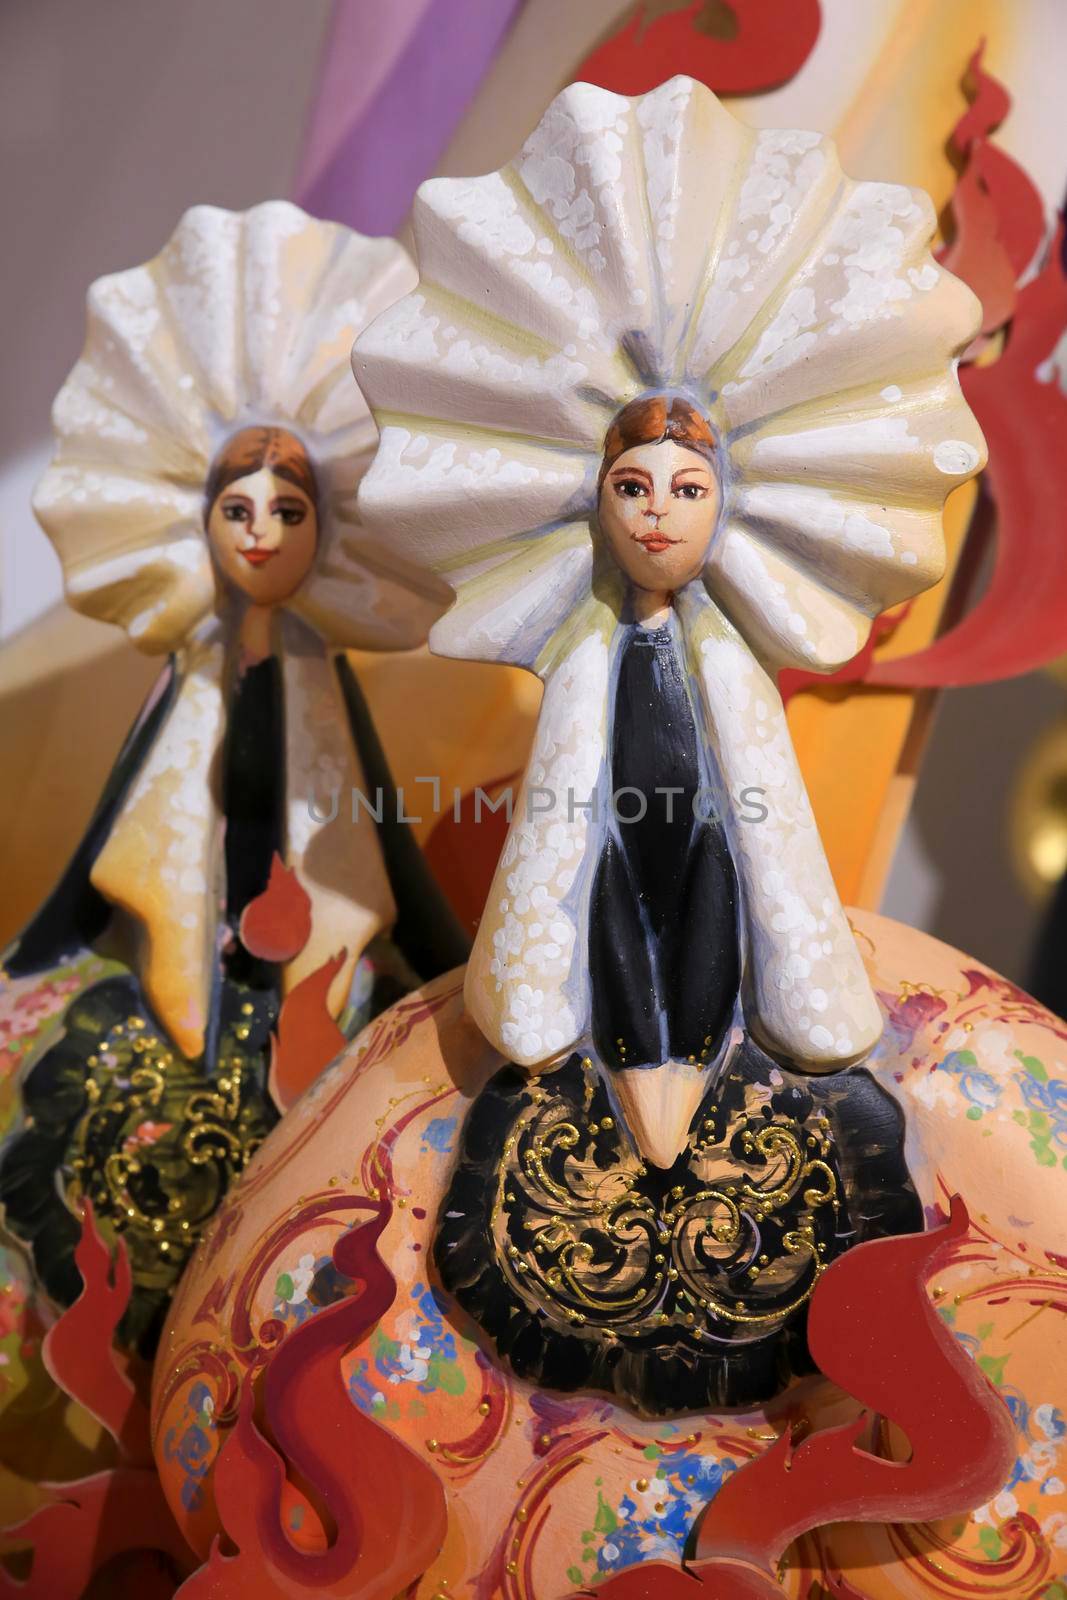 Alicante, Spain- May 12, 2022: Vintage cardboard figurines of fallera women in traditional costumes exhibited in The Hogueras Museum of Alicante